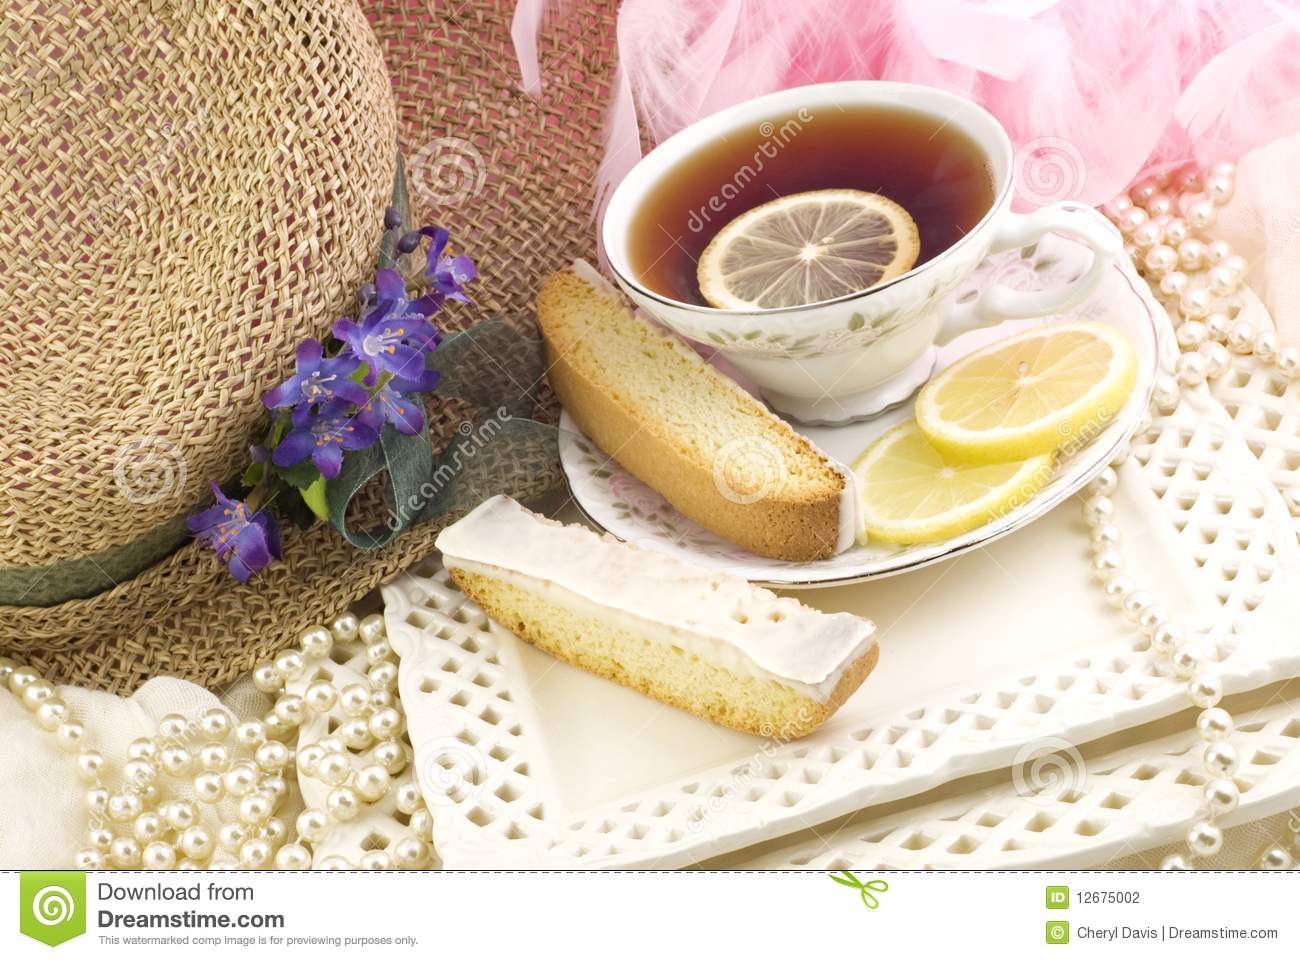 Ladies Tea Party With A Cup Of Tea Served On Fine China Fresh Lemon